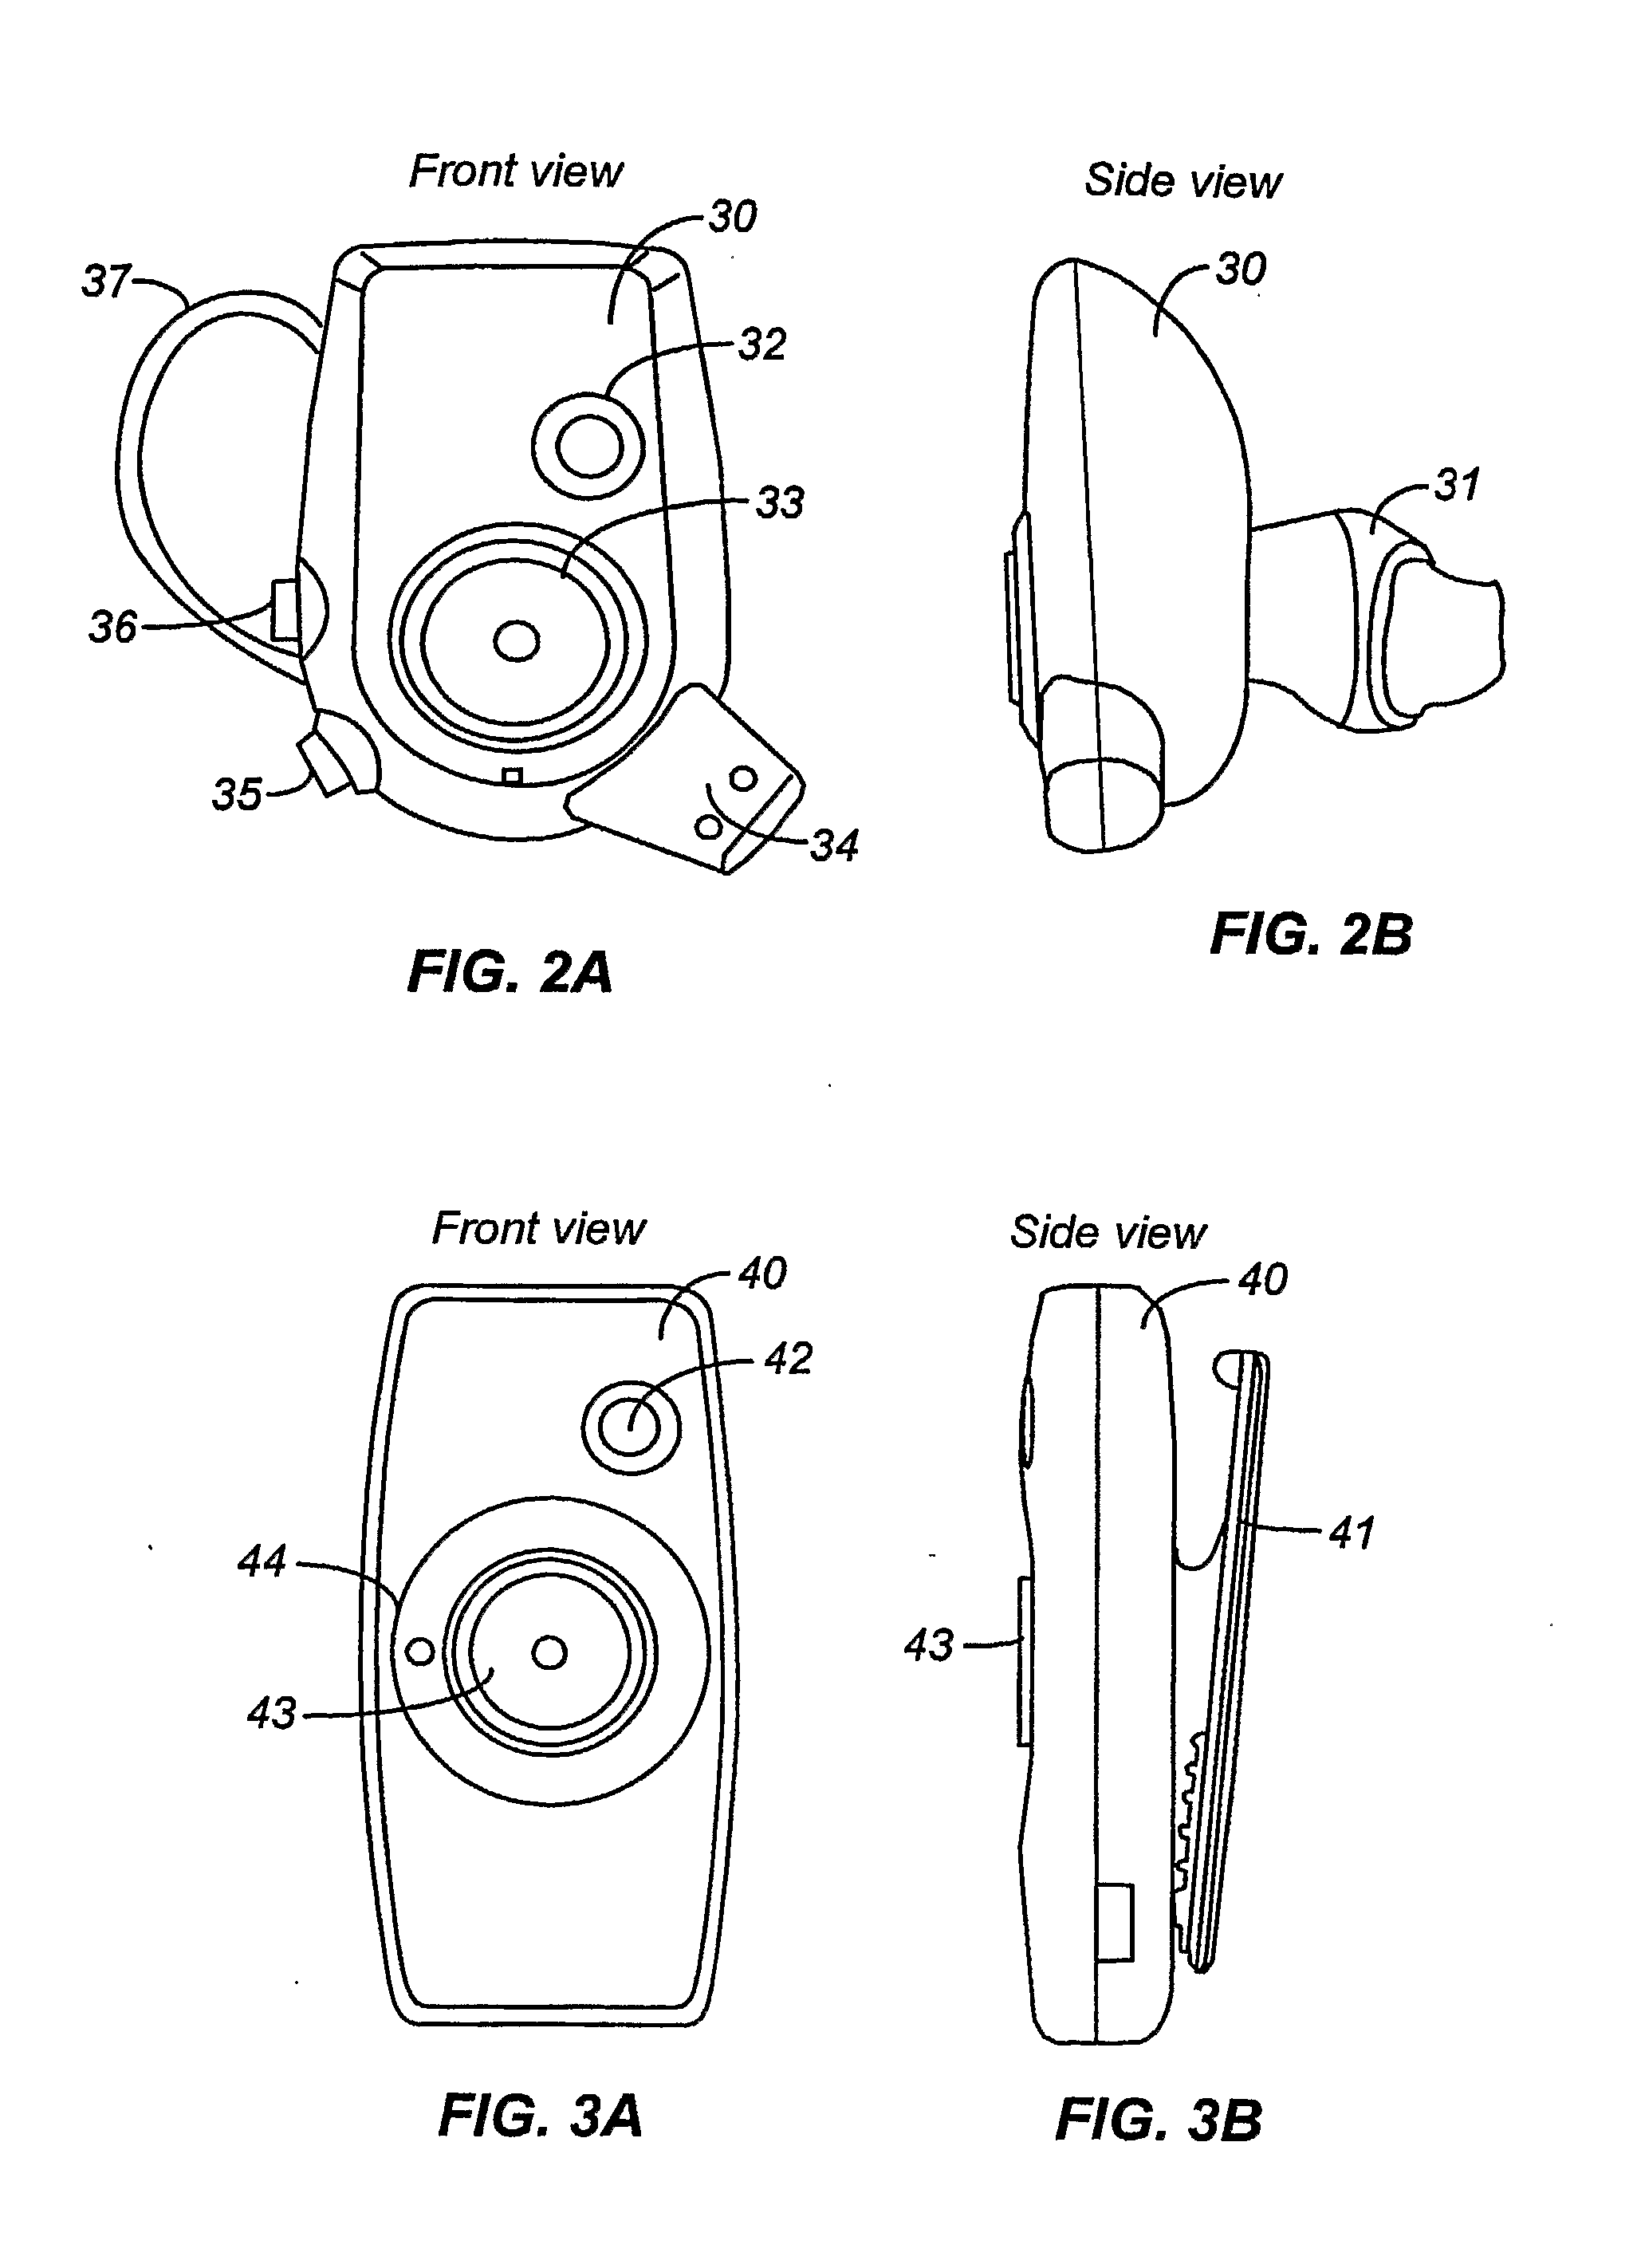 Personal Sound System Including Multi-Mode Ear Level Module with Priority Logic